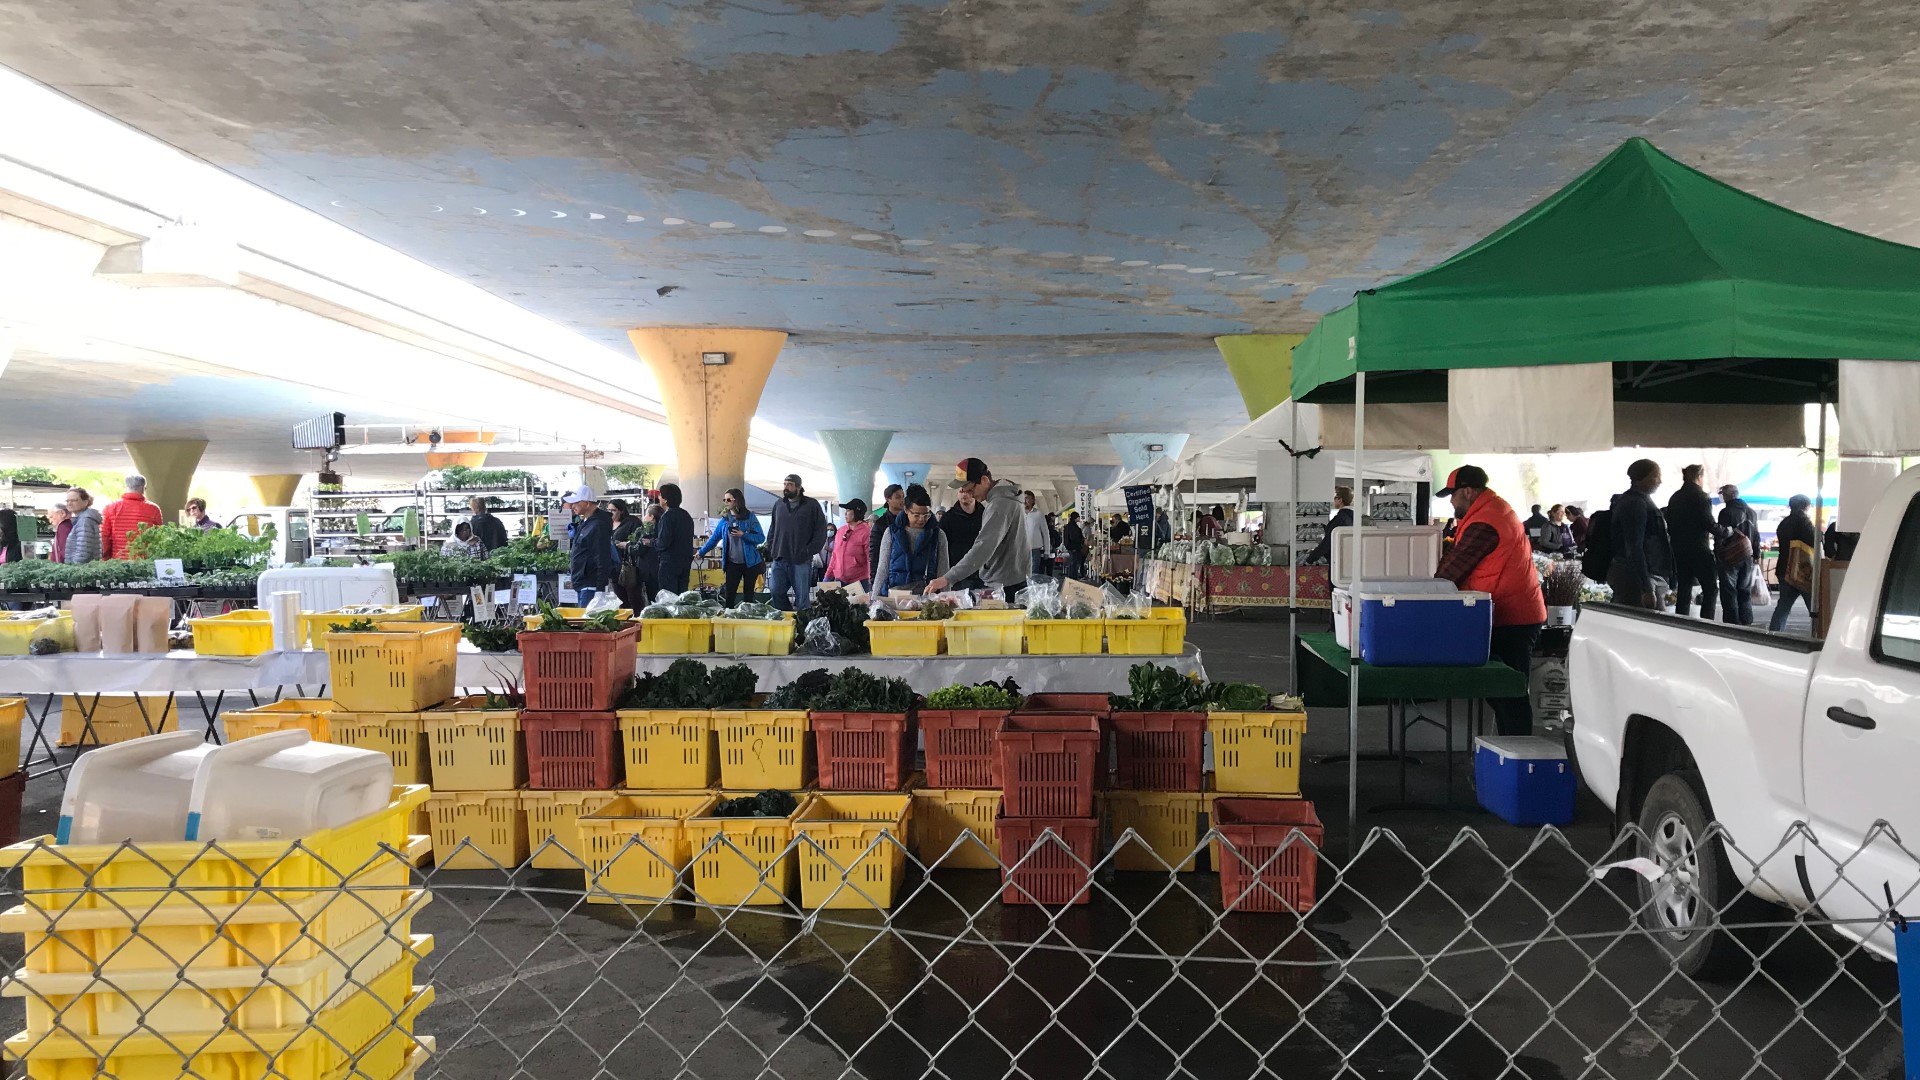 It wasn’t business as usual at the Sacramento farmers market under I-80 on Sunday morning, but people still came for shopping.